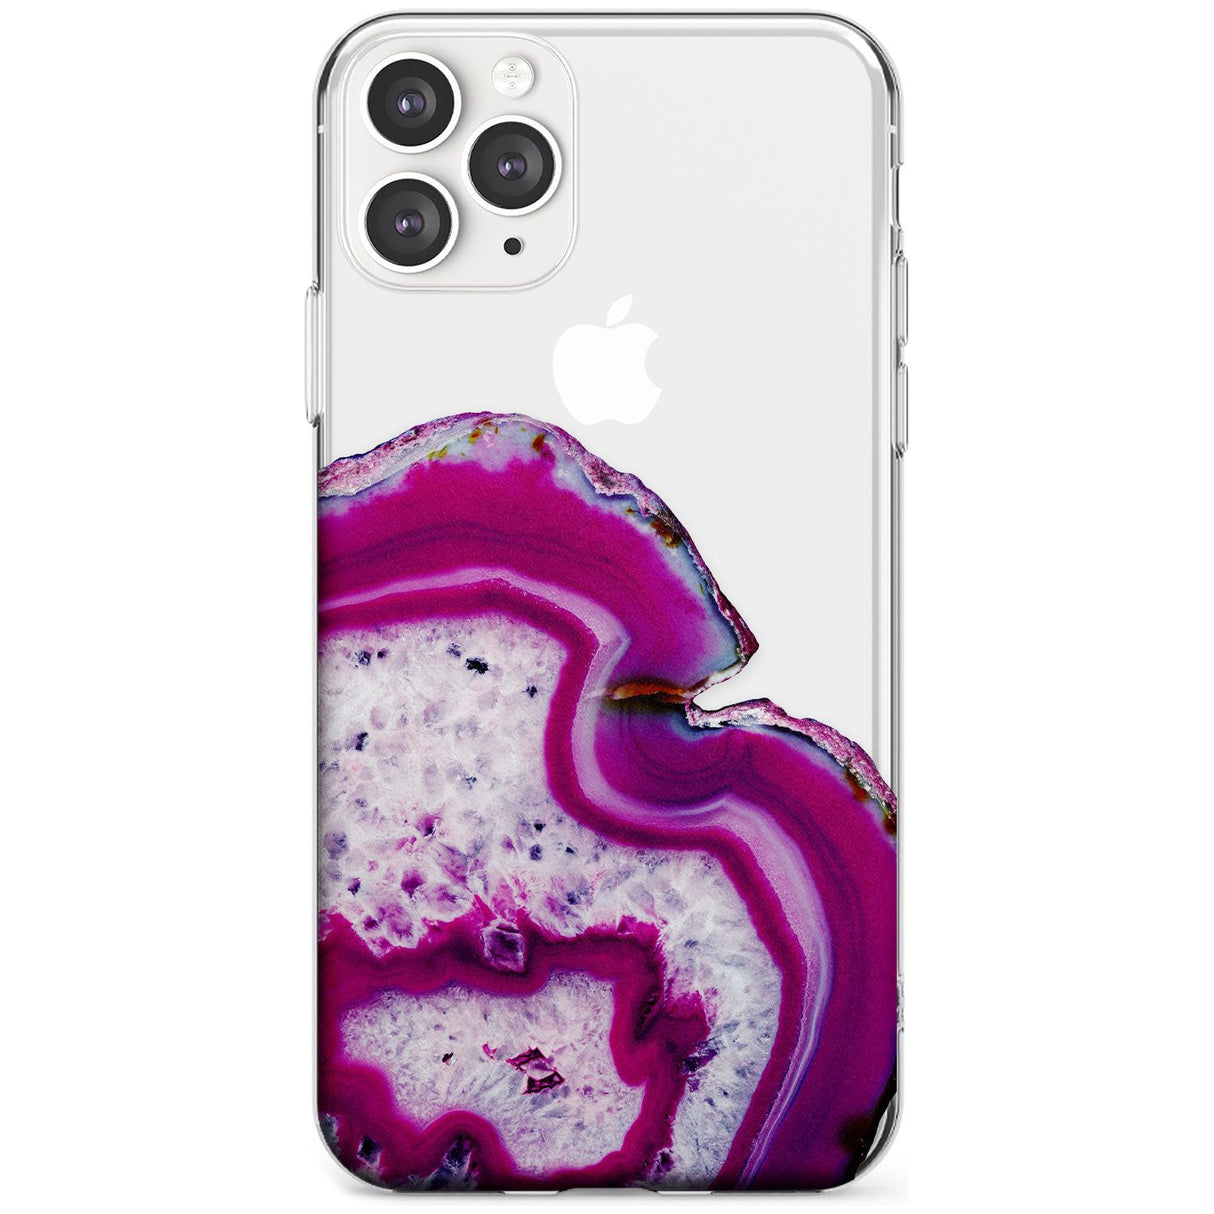 Violet & White Swirl Agate Crystal Clear Design Slim TPU Phone Case for iPhone 11 Pro Max